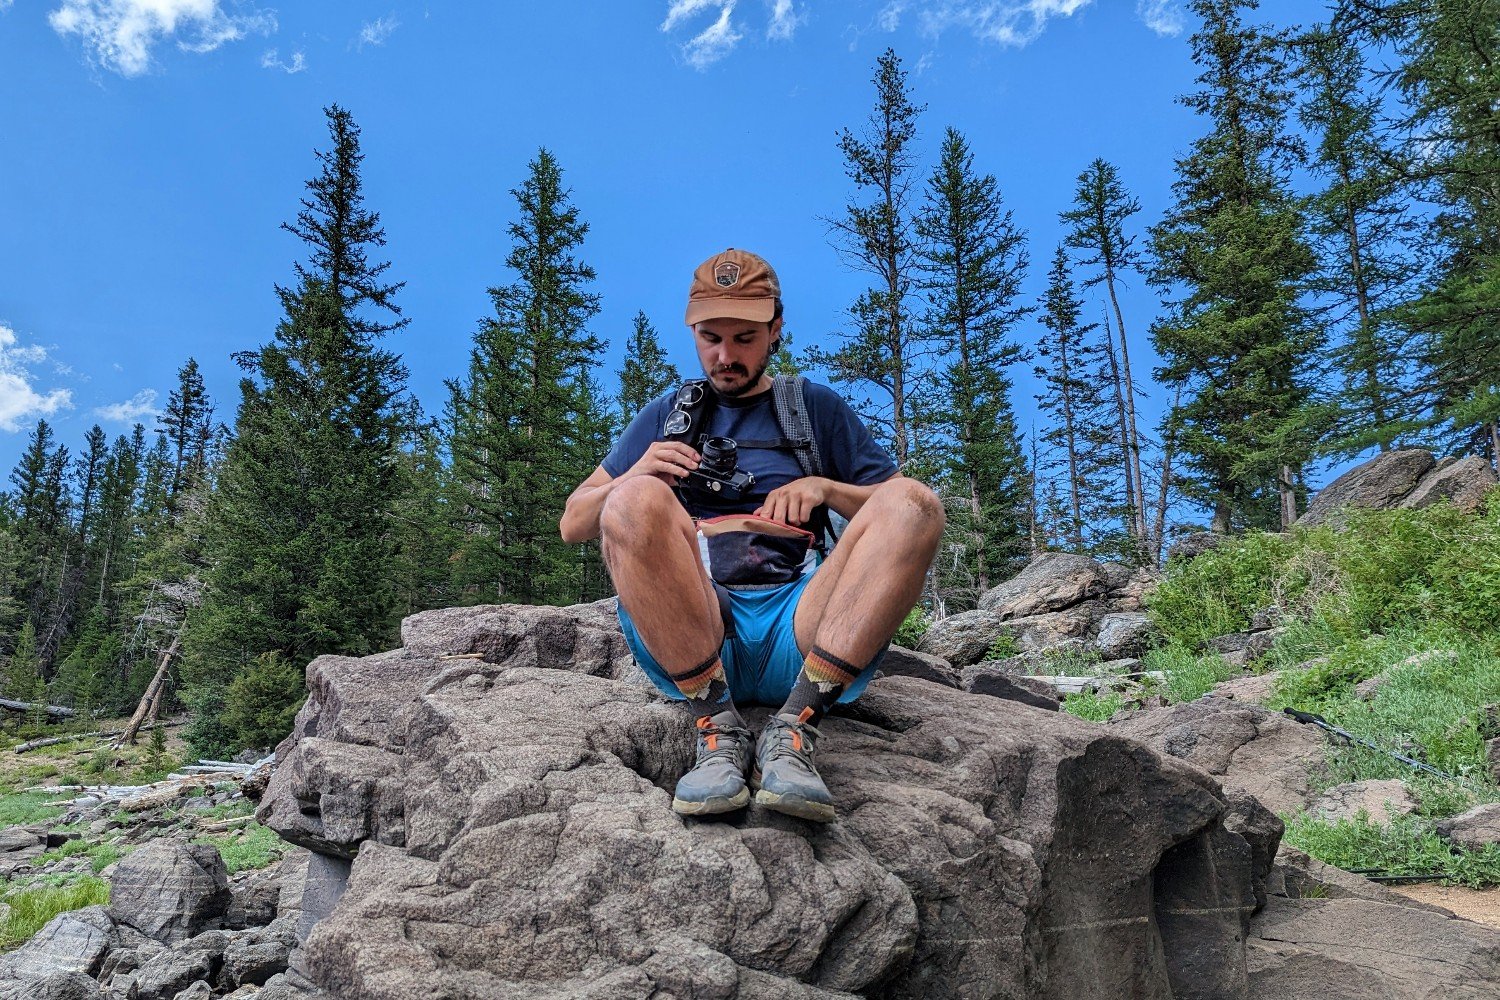 A hiker sitting on a large rock pulling a camera out of an Atom Roo fanny pack. There are pine trees in the background with a bright blue sky and little whispy clouds